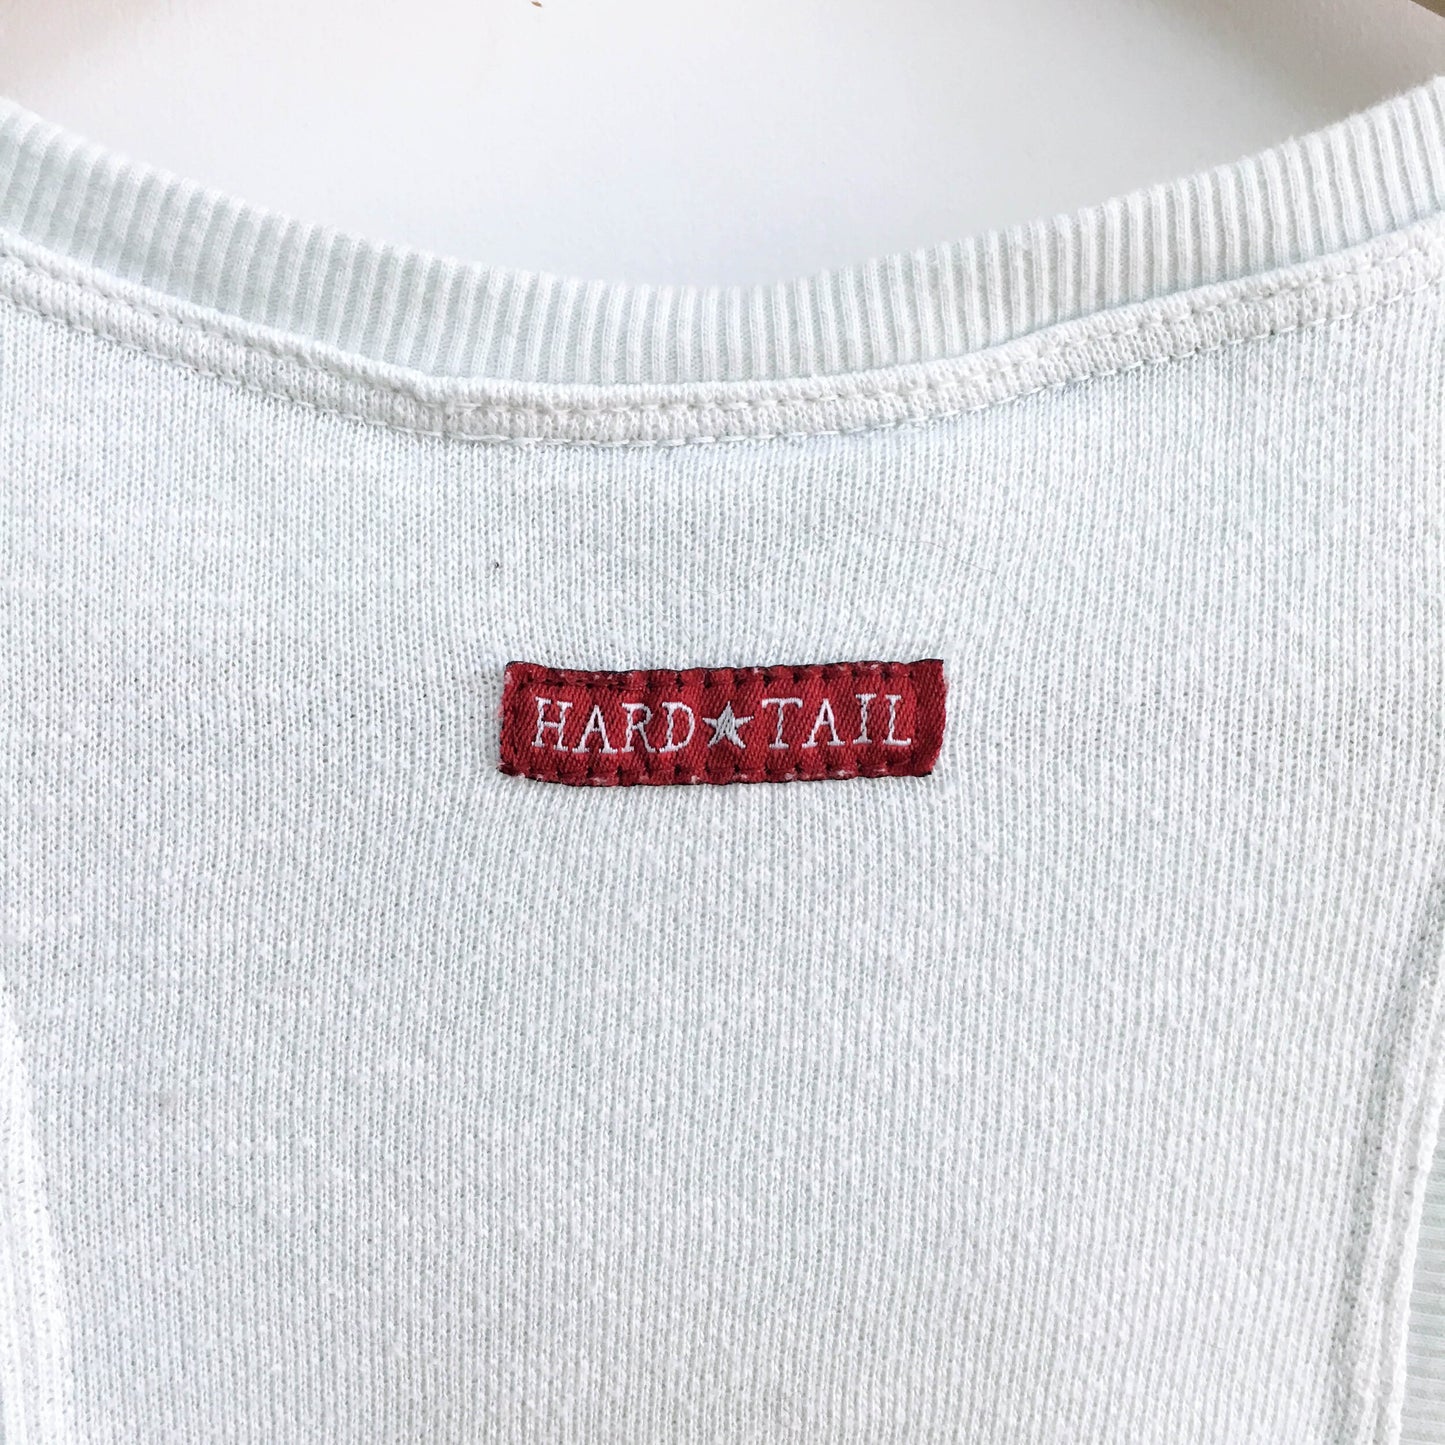 Hard Tail Forever sweatshirt tank - size Small